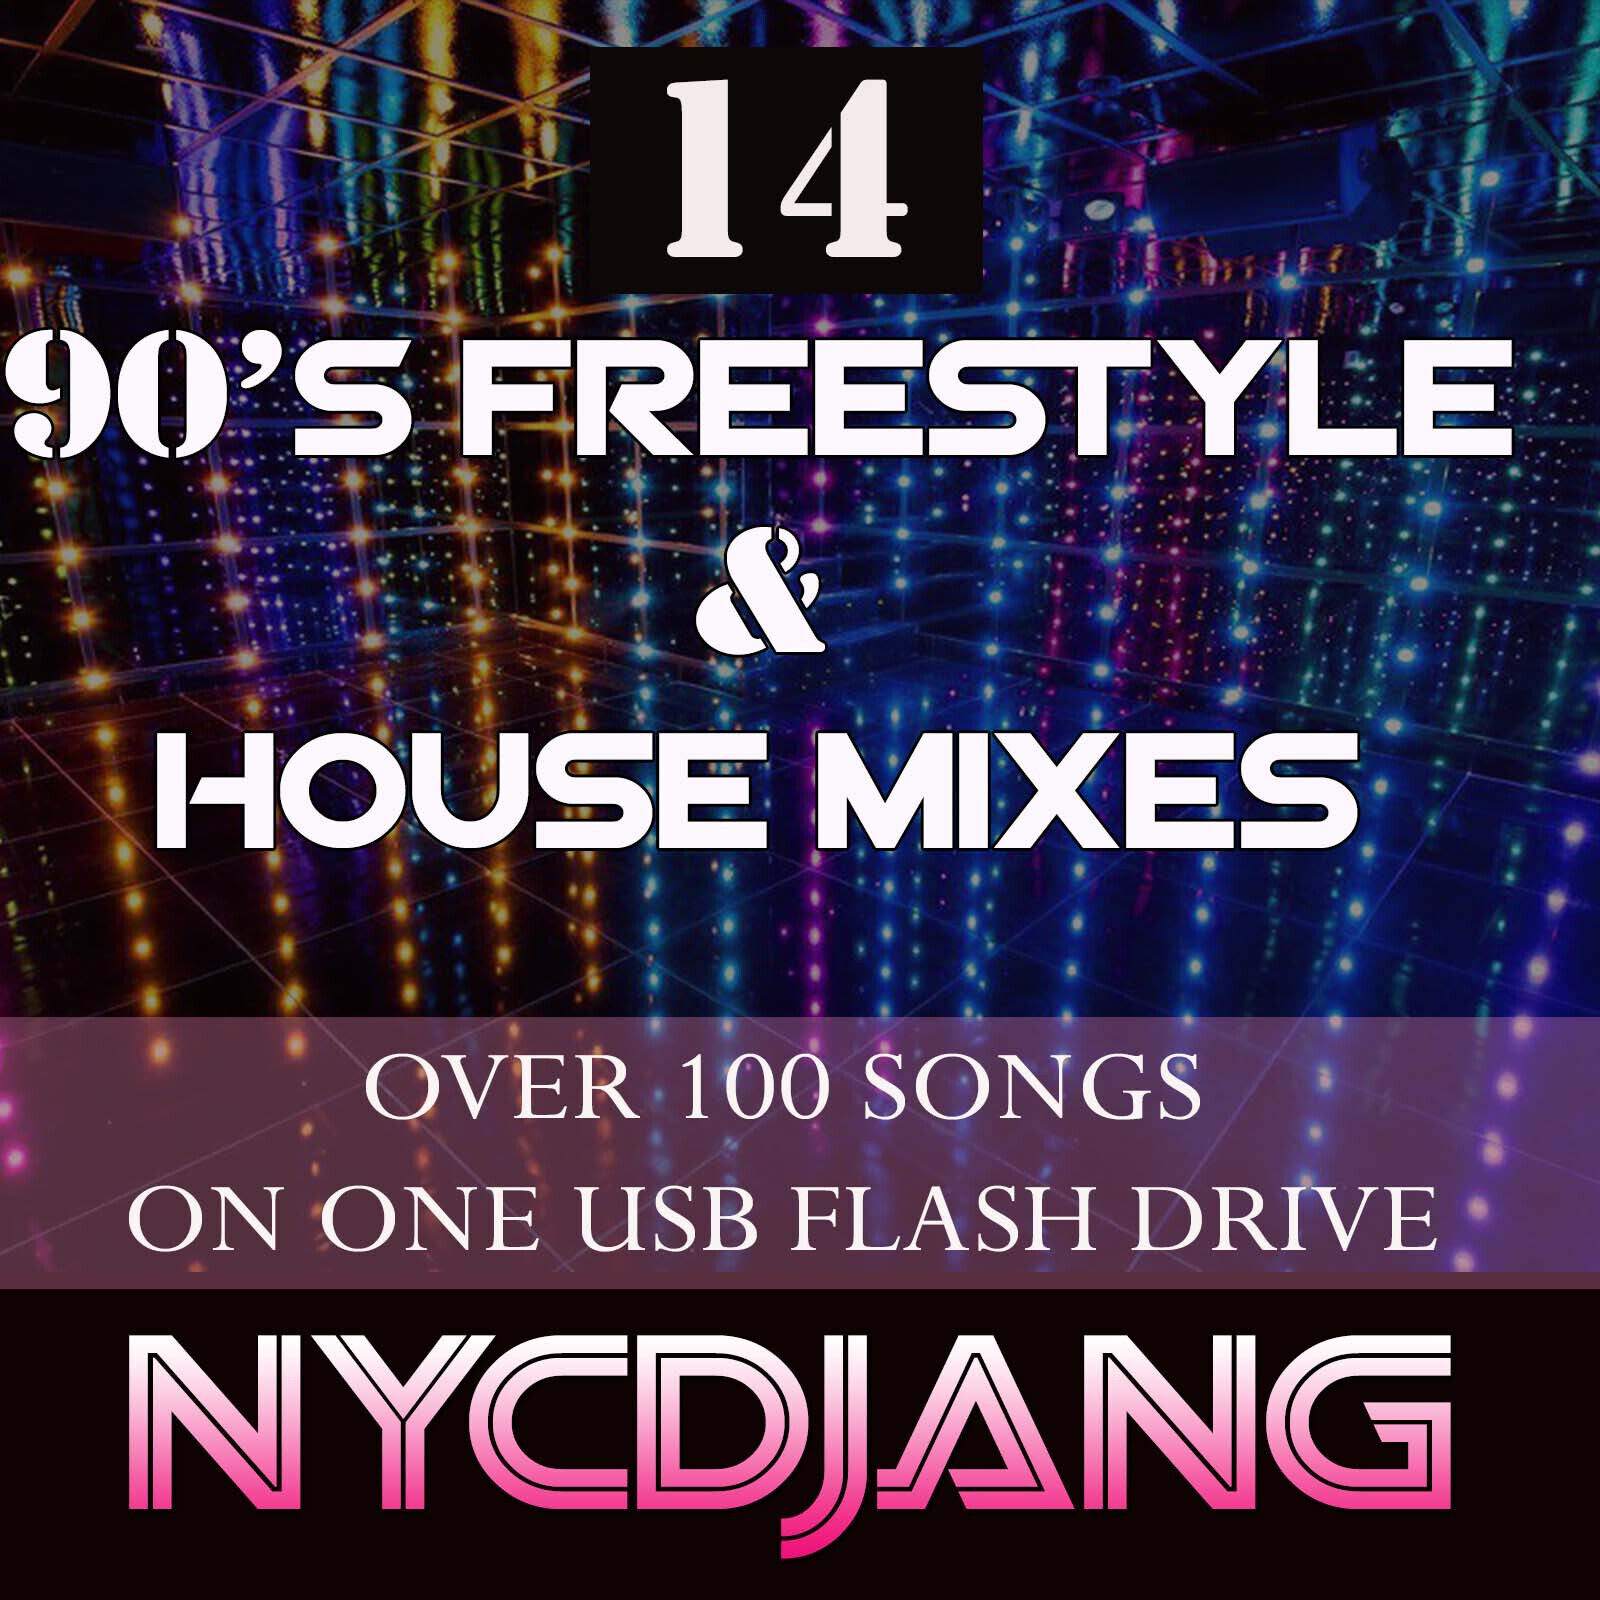 Freestyle & House Music 1990's - 14 DJ Promo Mixes on one USB over 100 songs